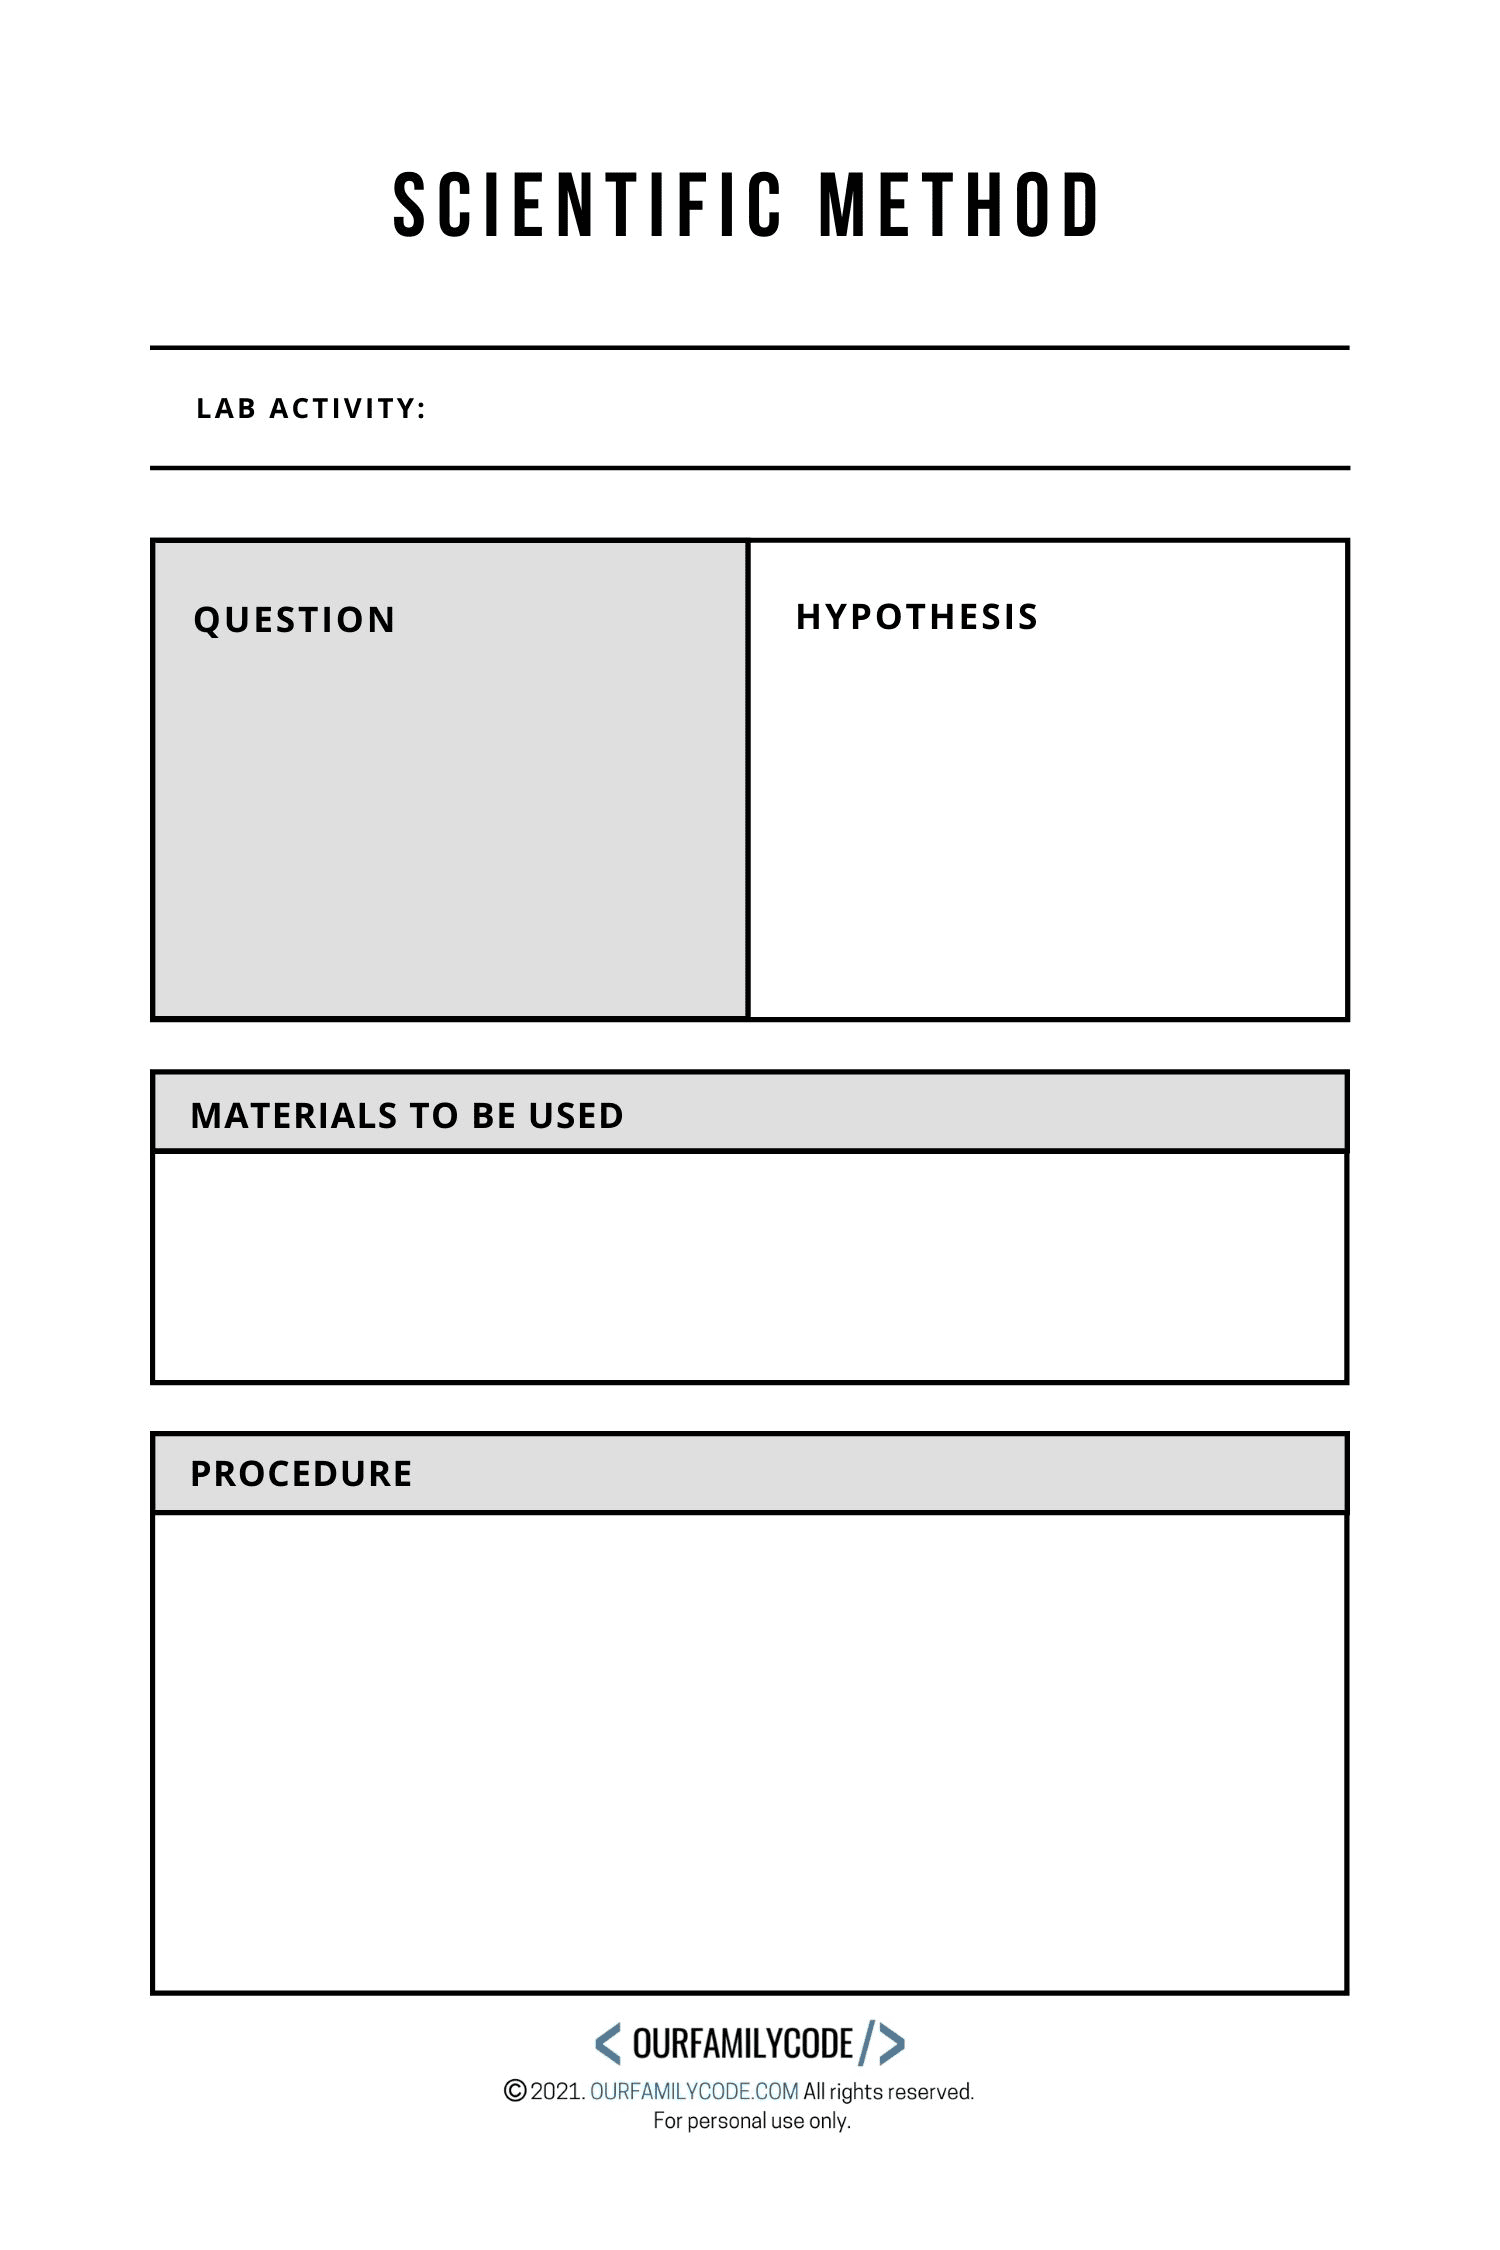 A picture of a blank scientific method worksheet for kids science fair experiment.